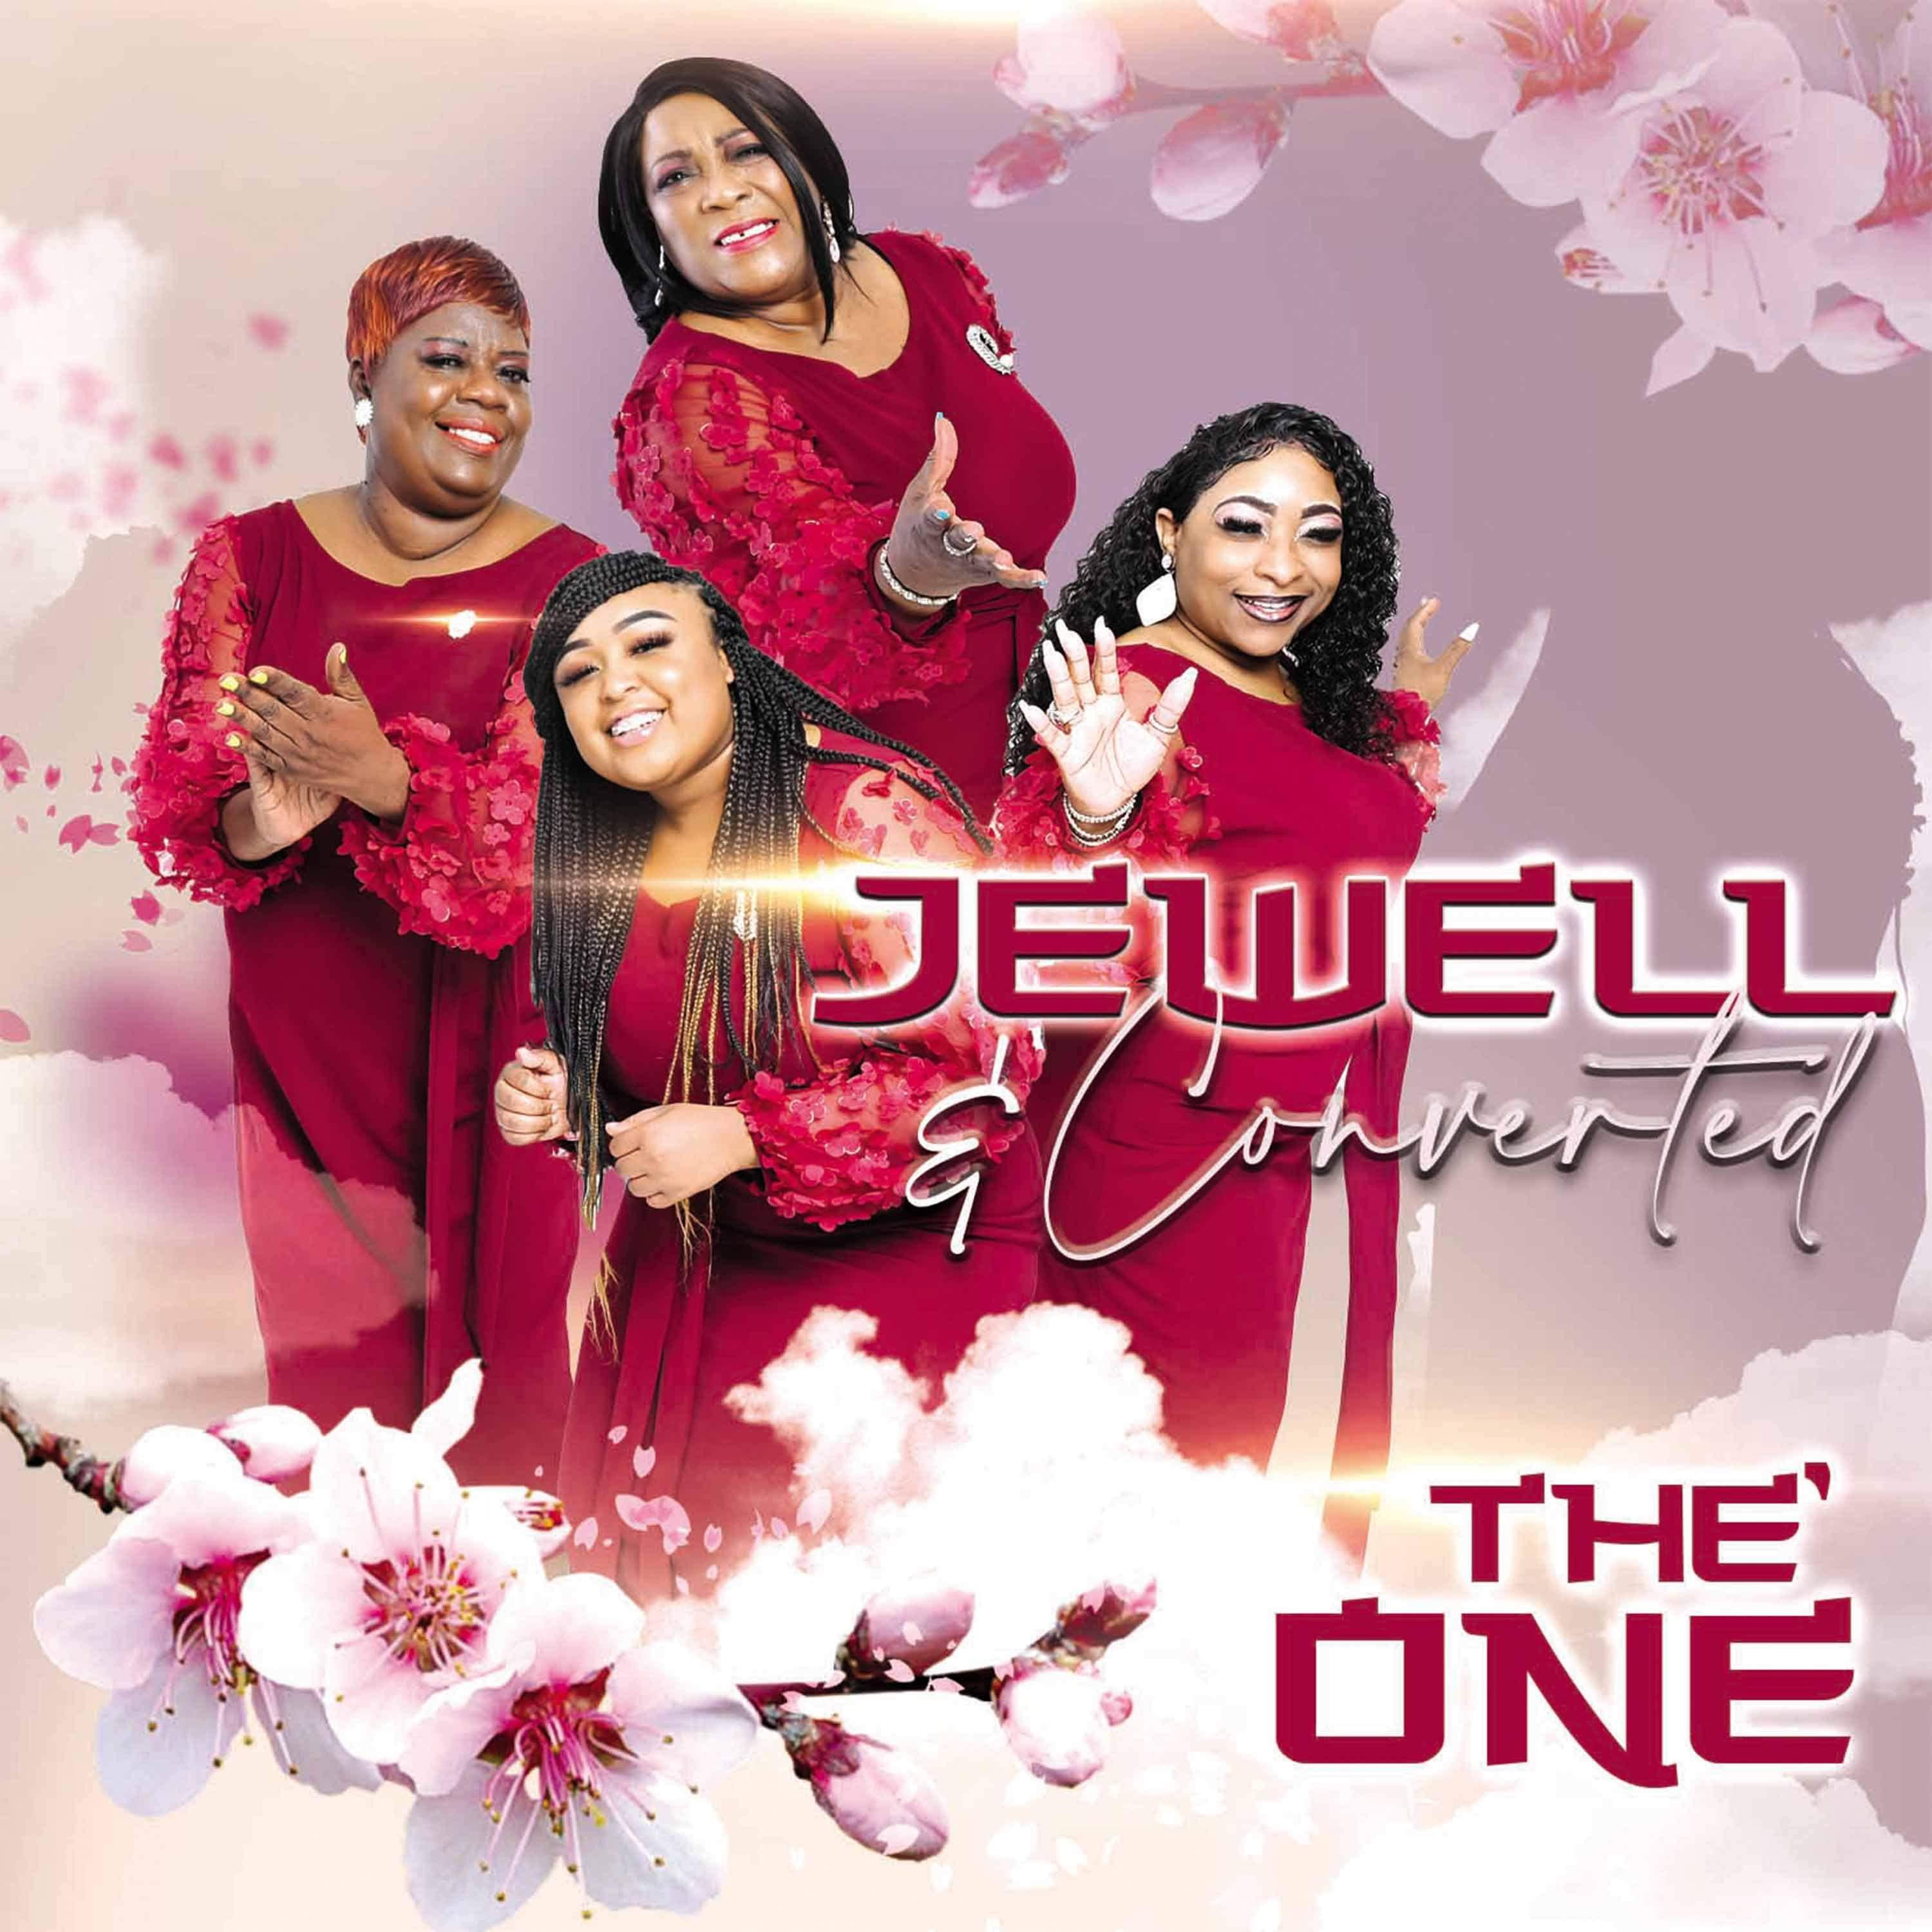 Jewell & Converted - The' One